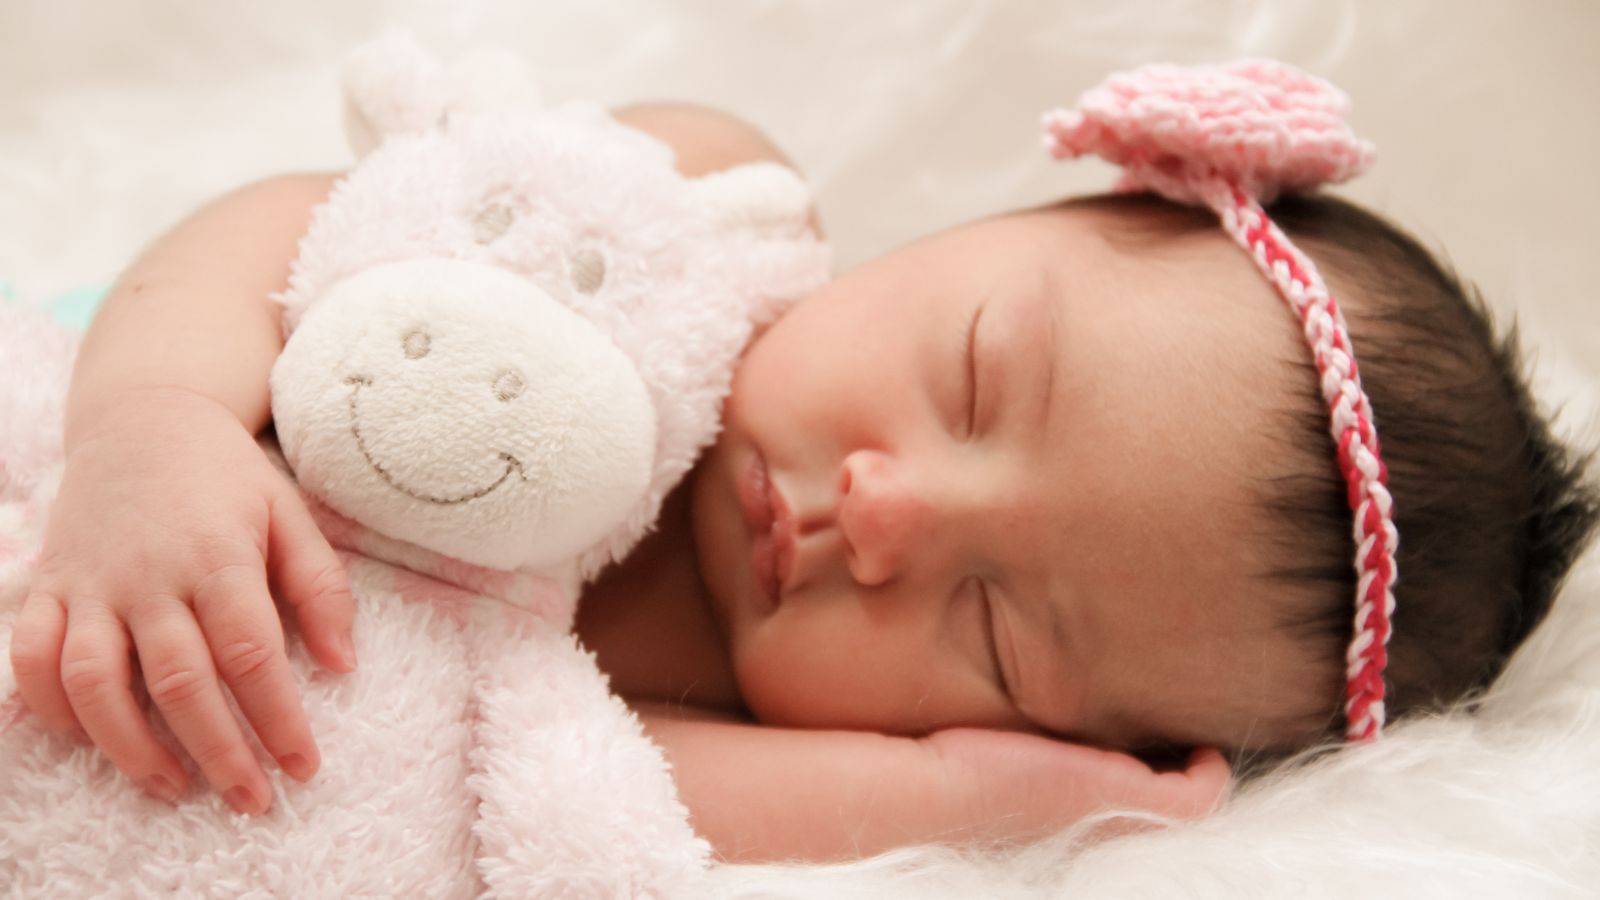 What are some sleep-related concerns in newborns?